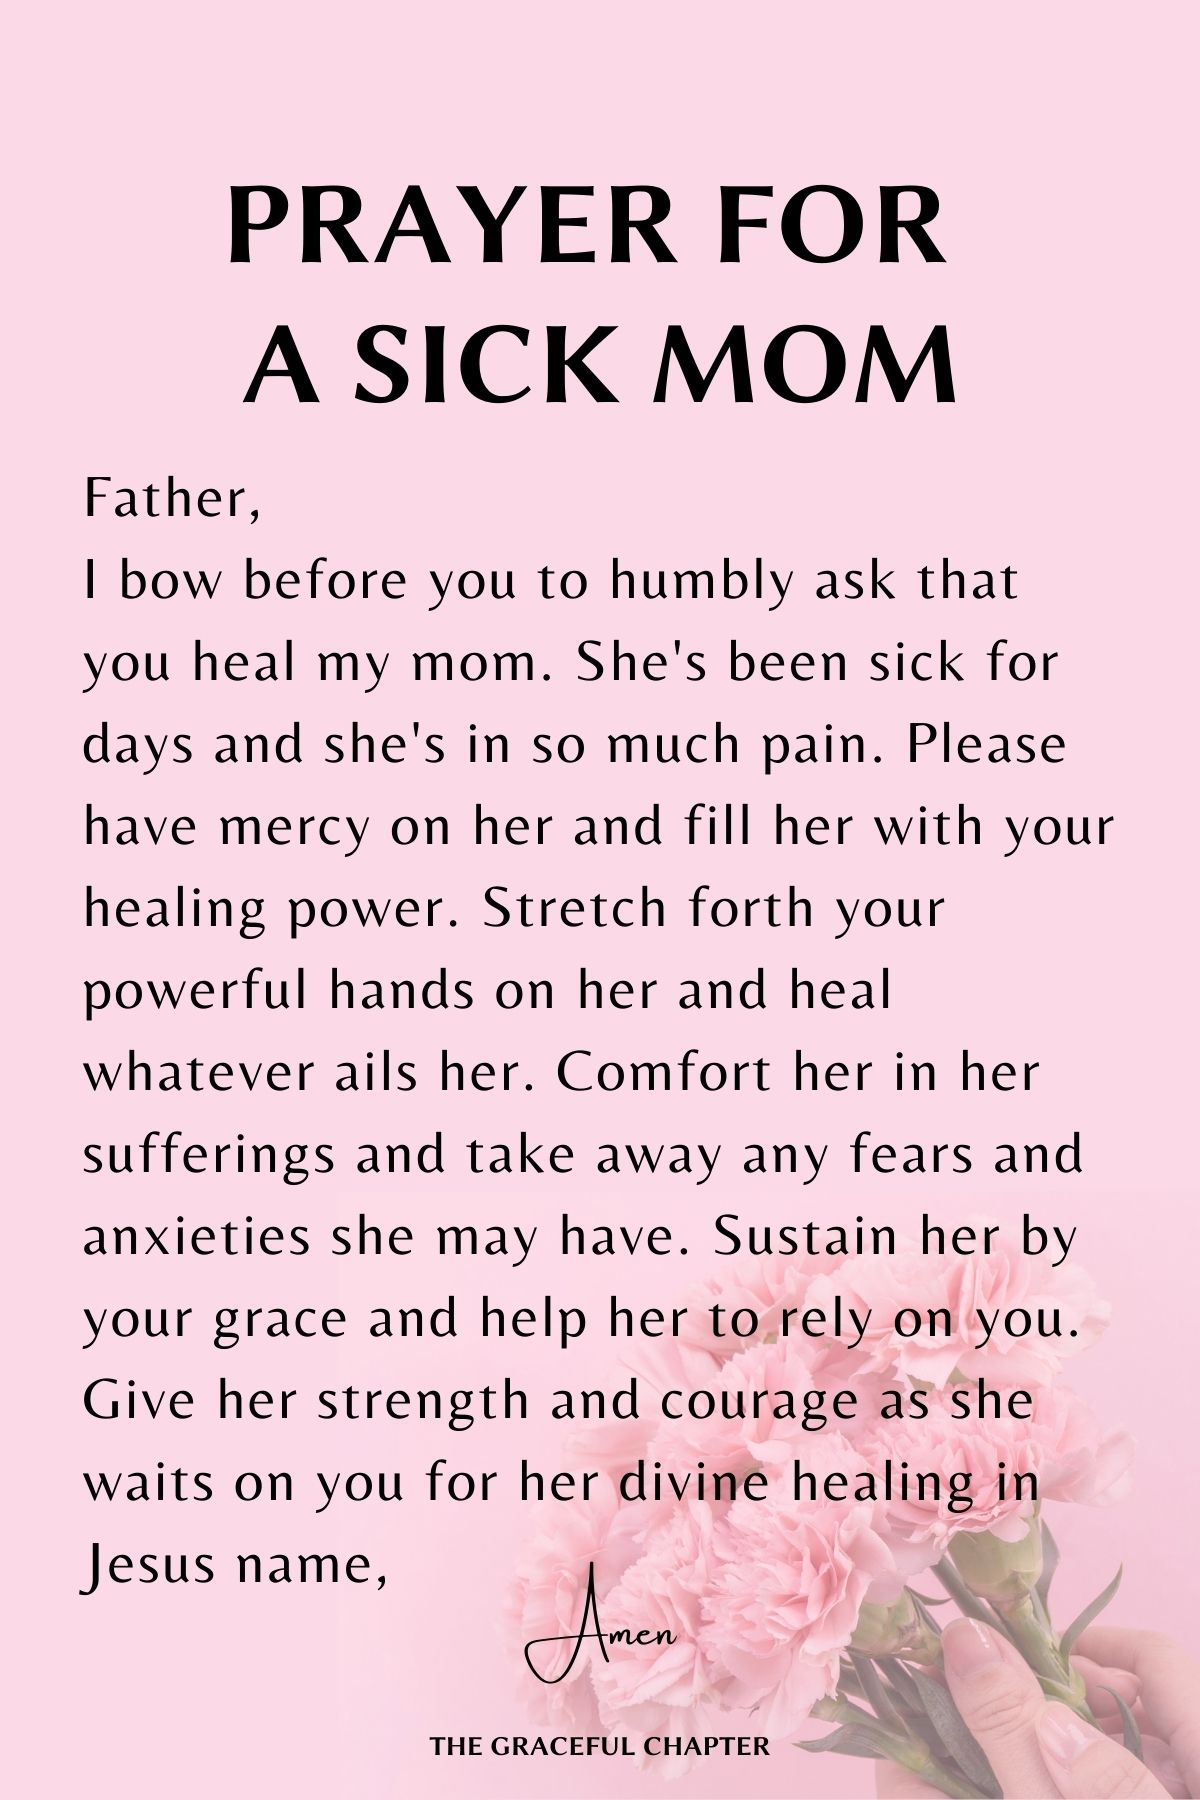 Prayer for my mother to be healed